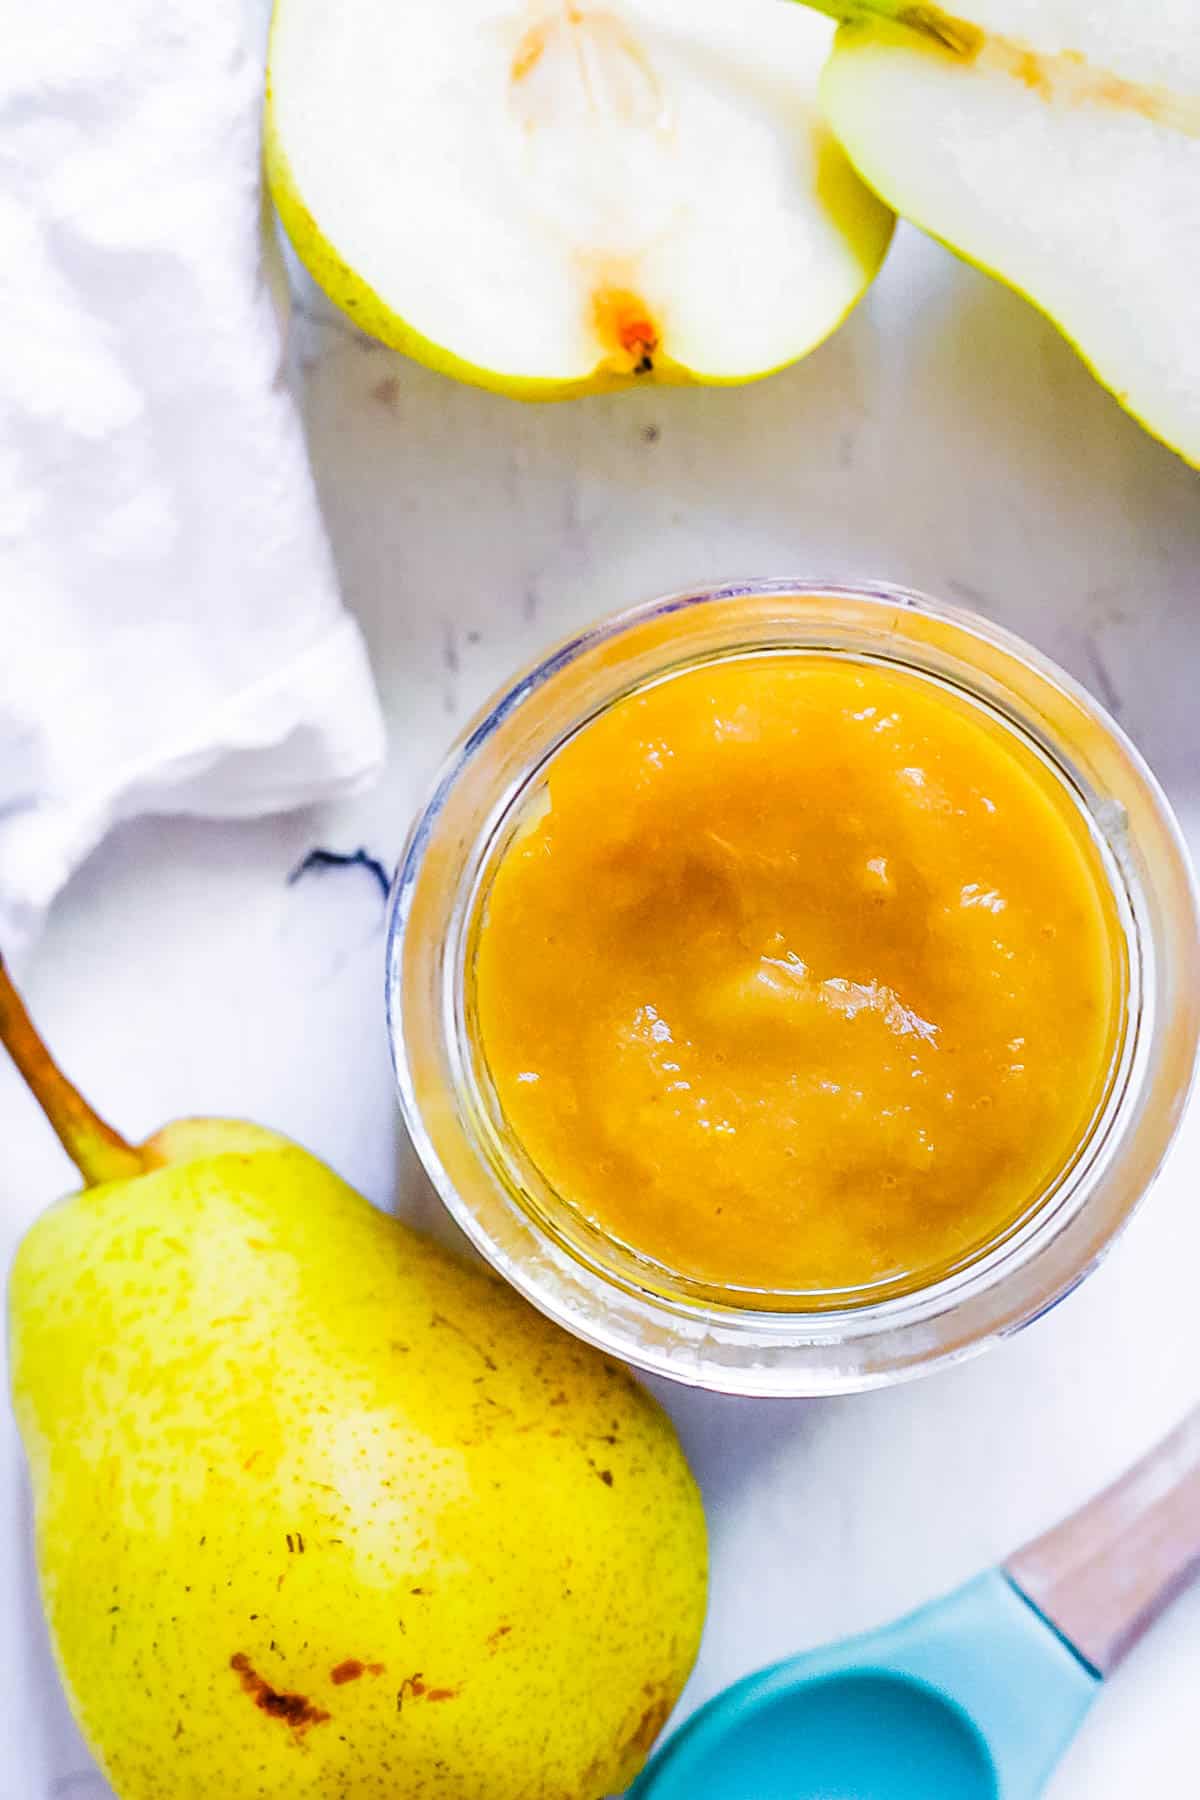 Pear baby food in a gl، jar on a white countertop with cut pears on the side.